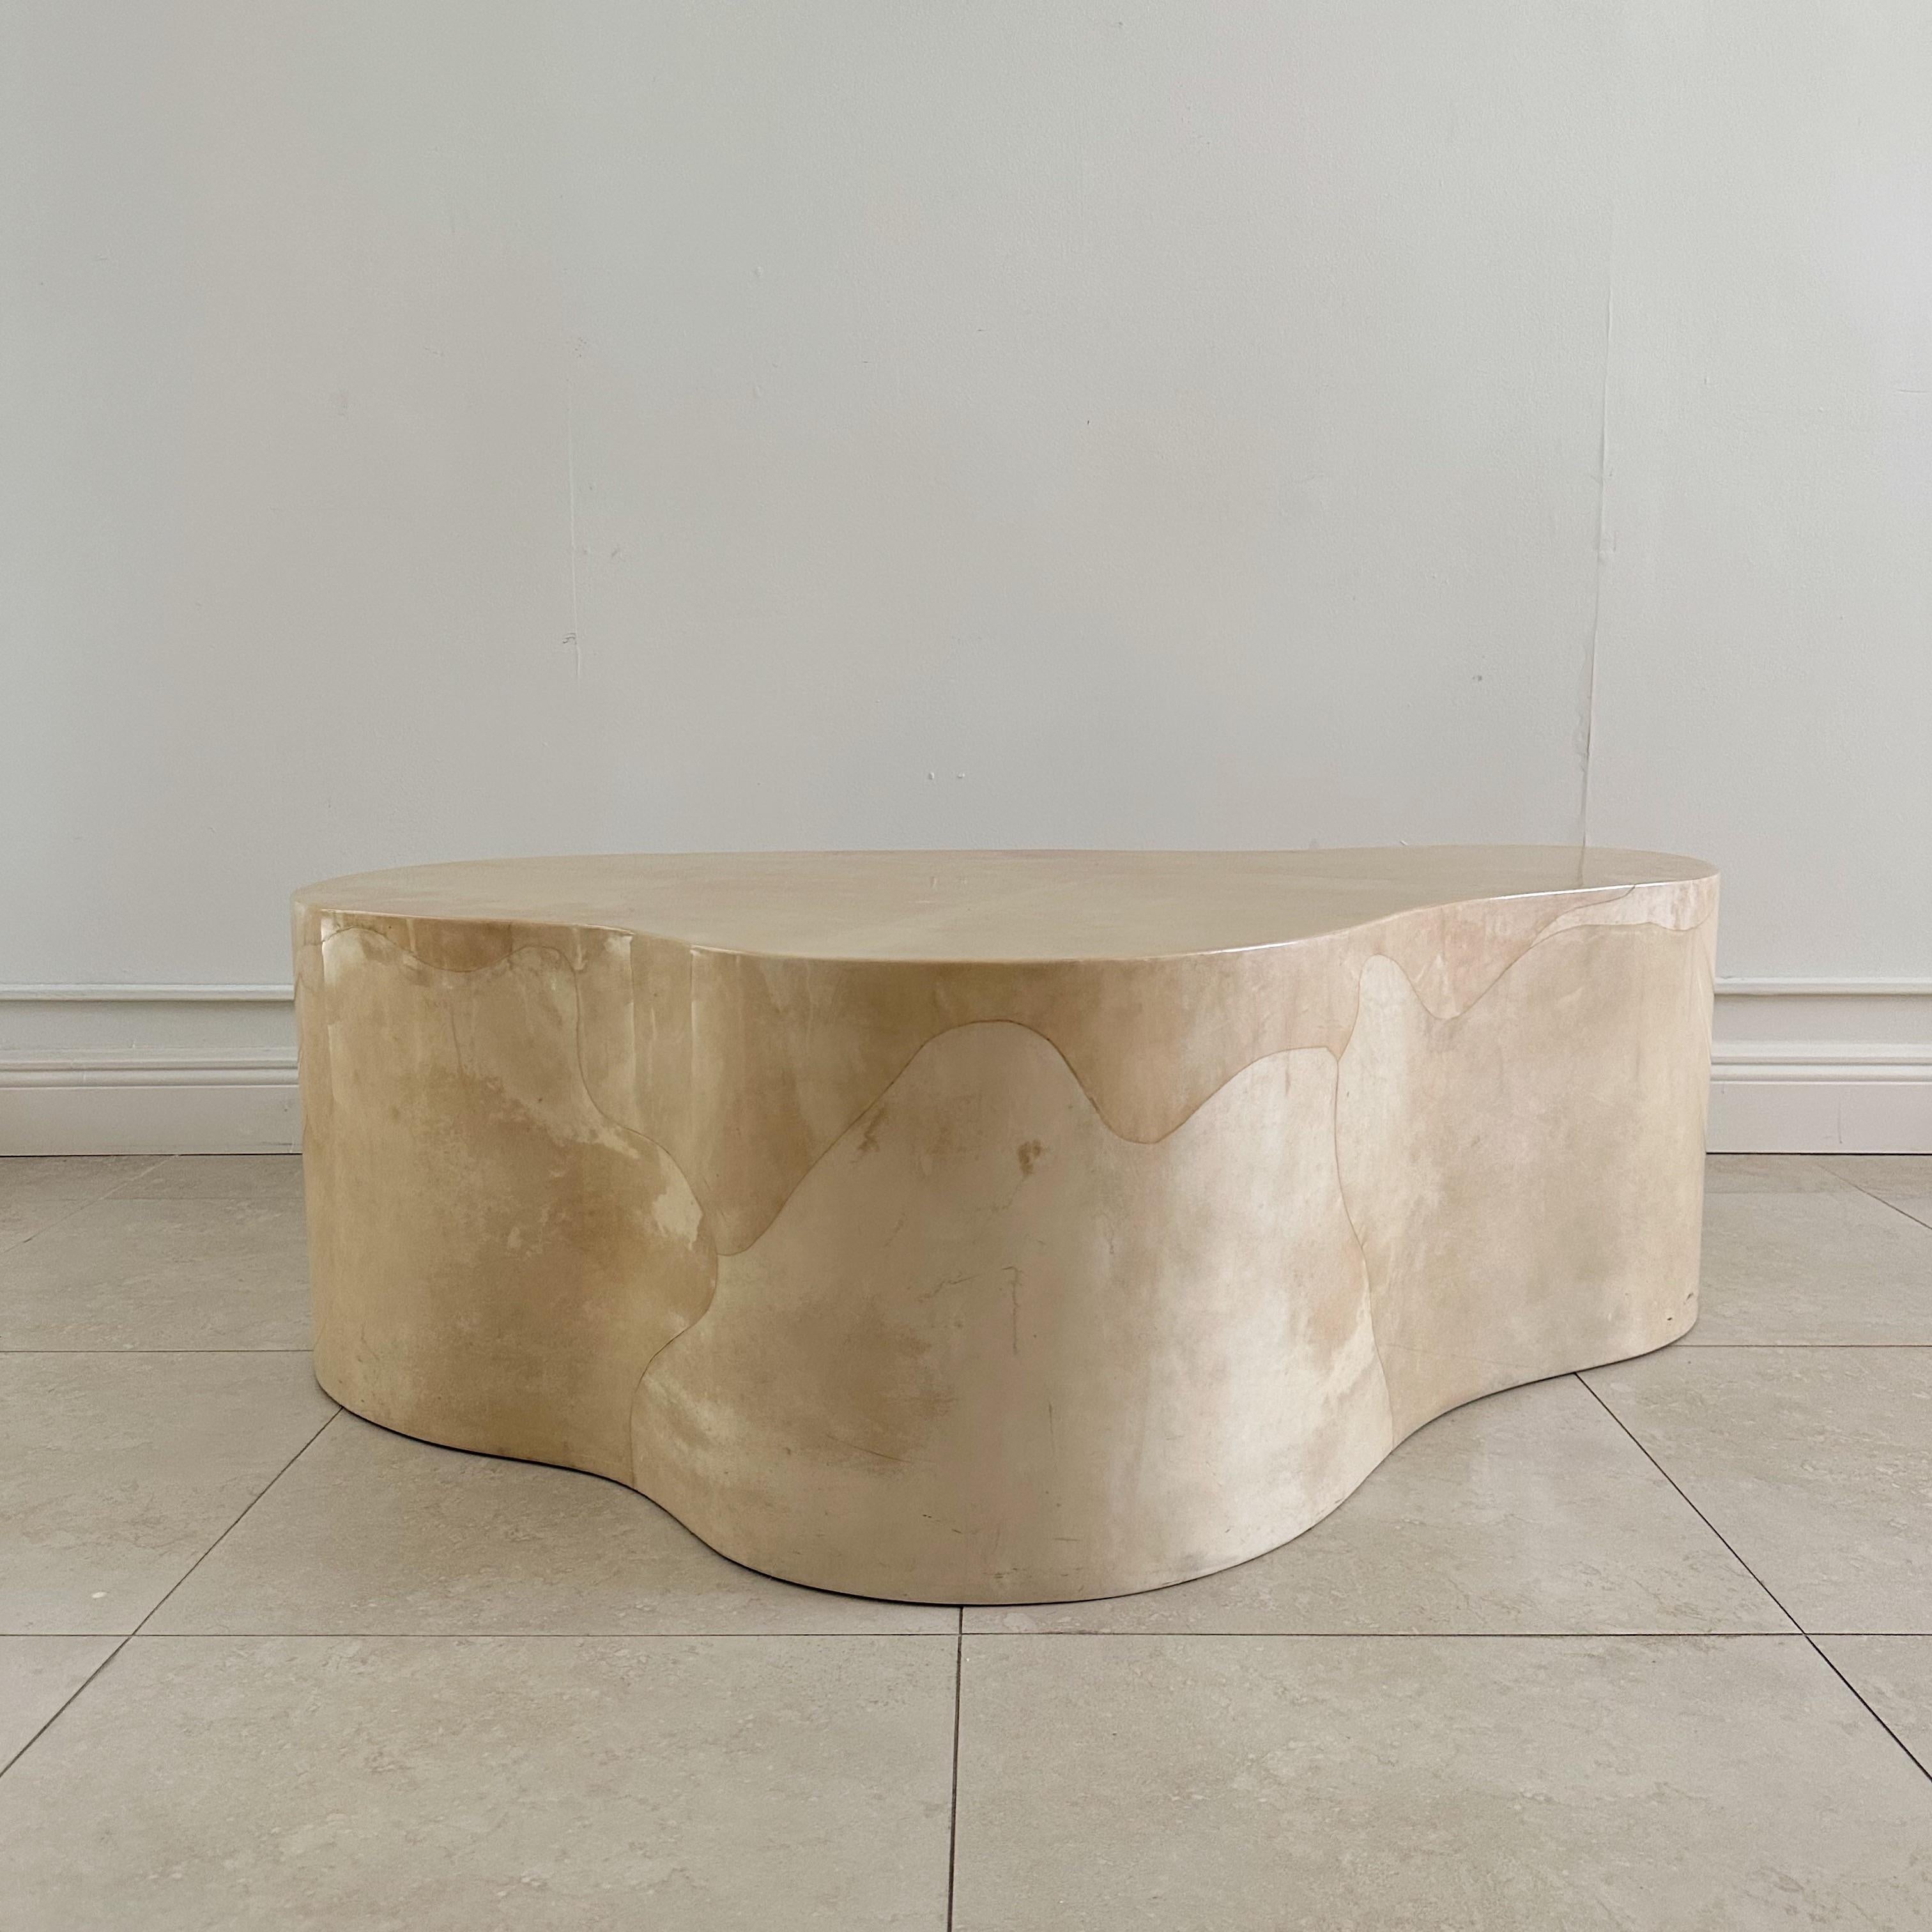 Karl Springer biomorphic freeform table, crafted in the 1980s, showcases Springer's mastery in harmonizing organic shapes with impeccable craftsmanship. The table is expertly covered in a lavish cream and beige-colored goatskin lacquer. Its smooth